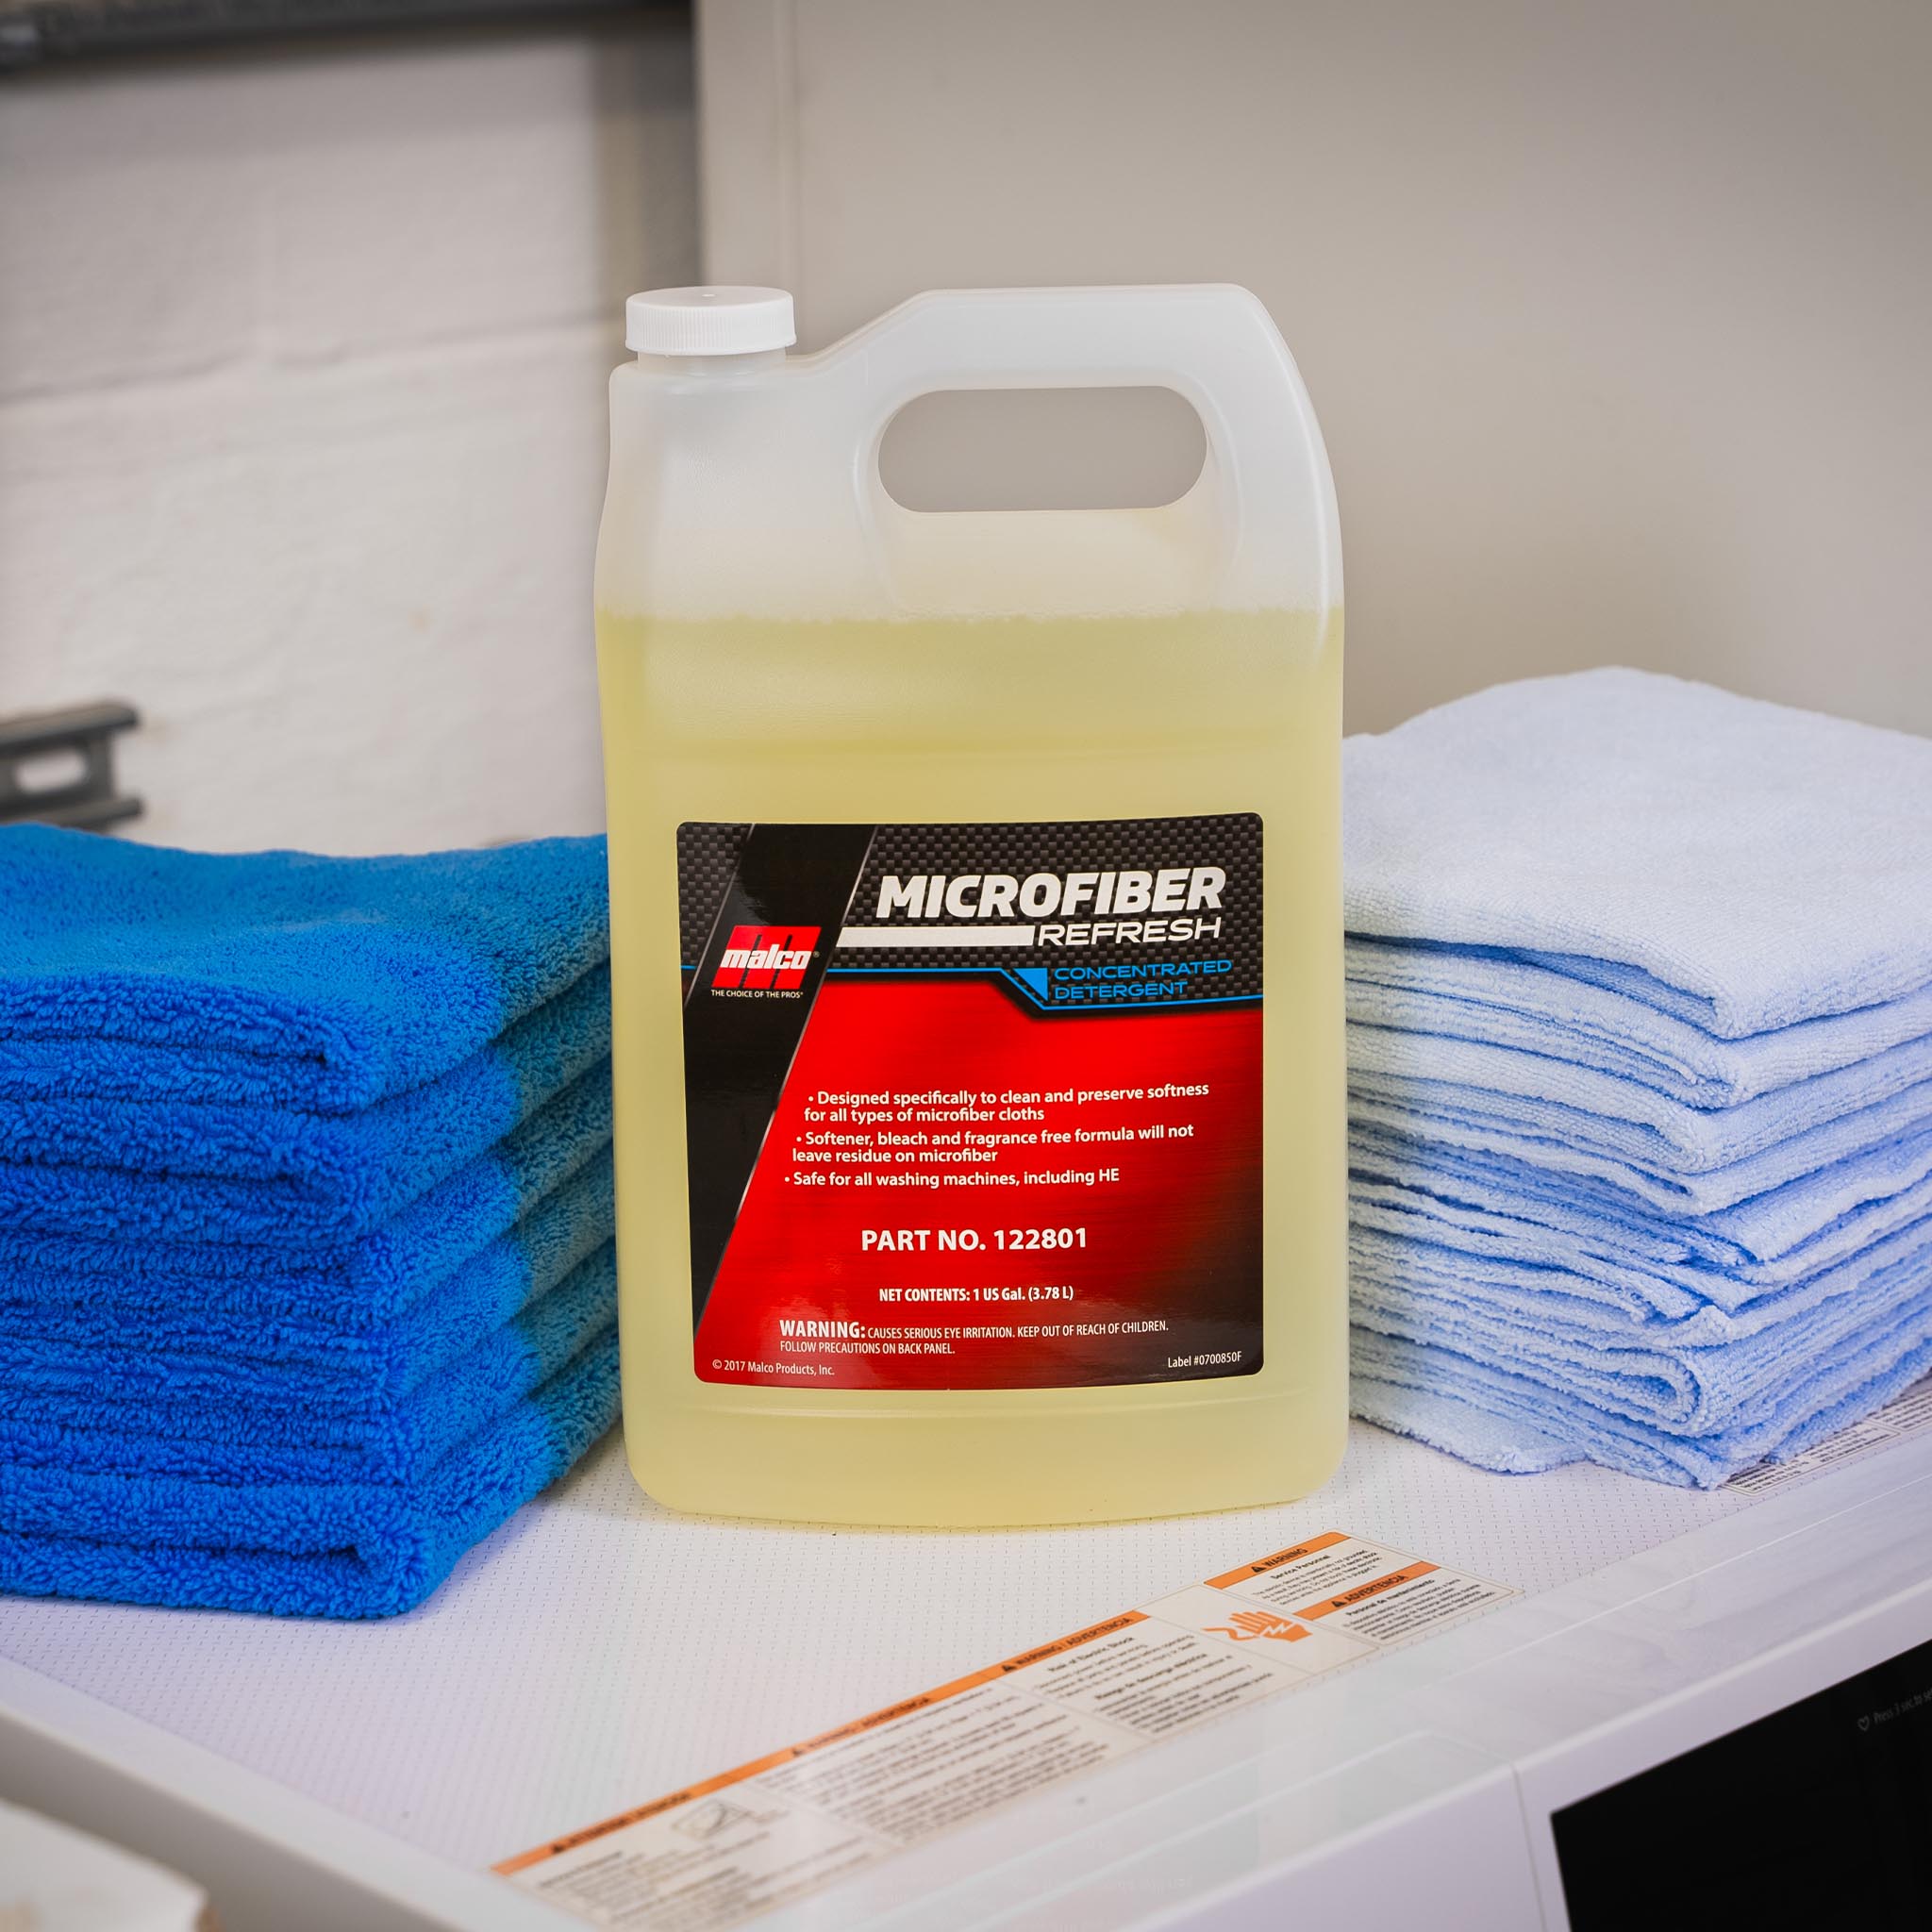 Malco Automotive 122801 Microfiber Refresh Concentrated Detergent